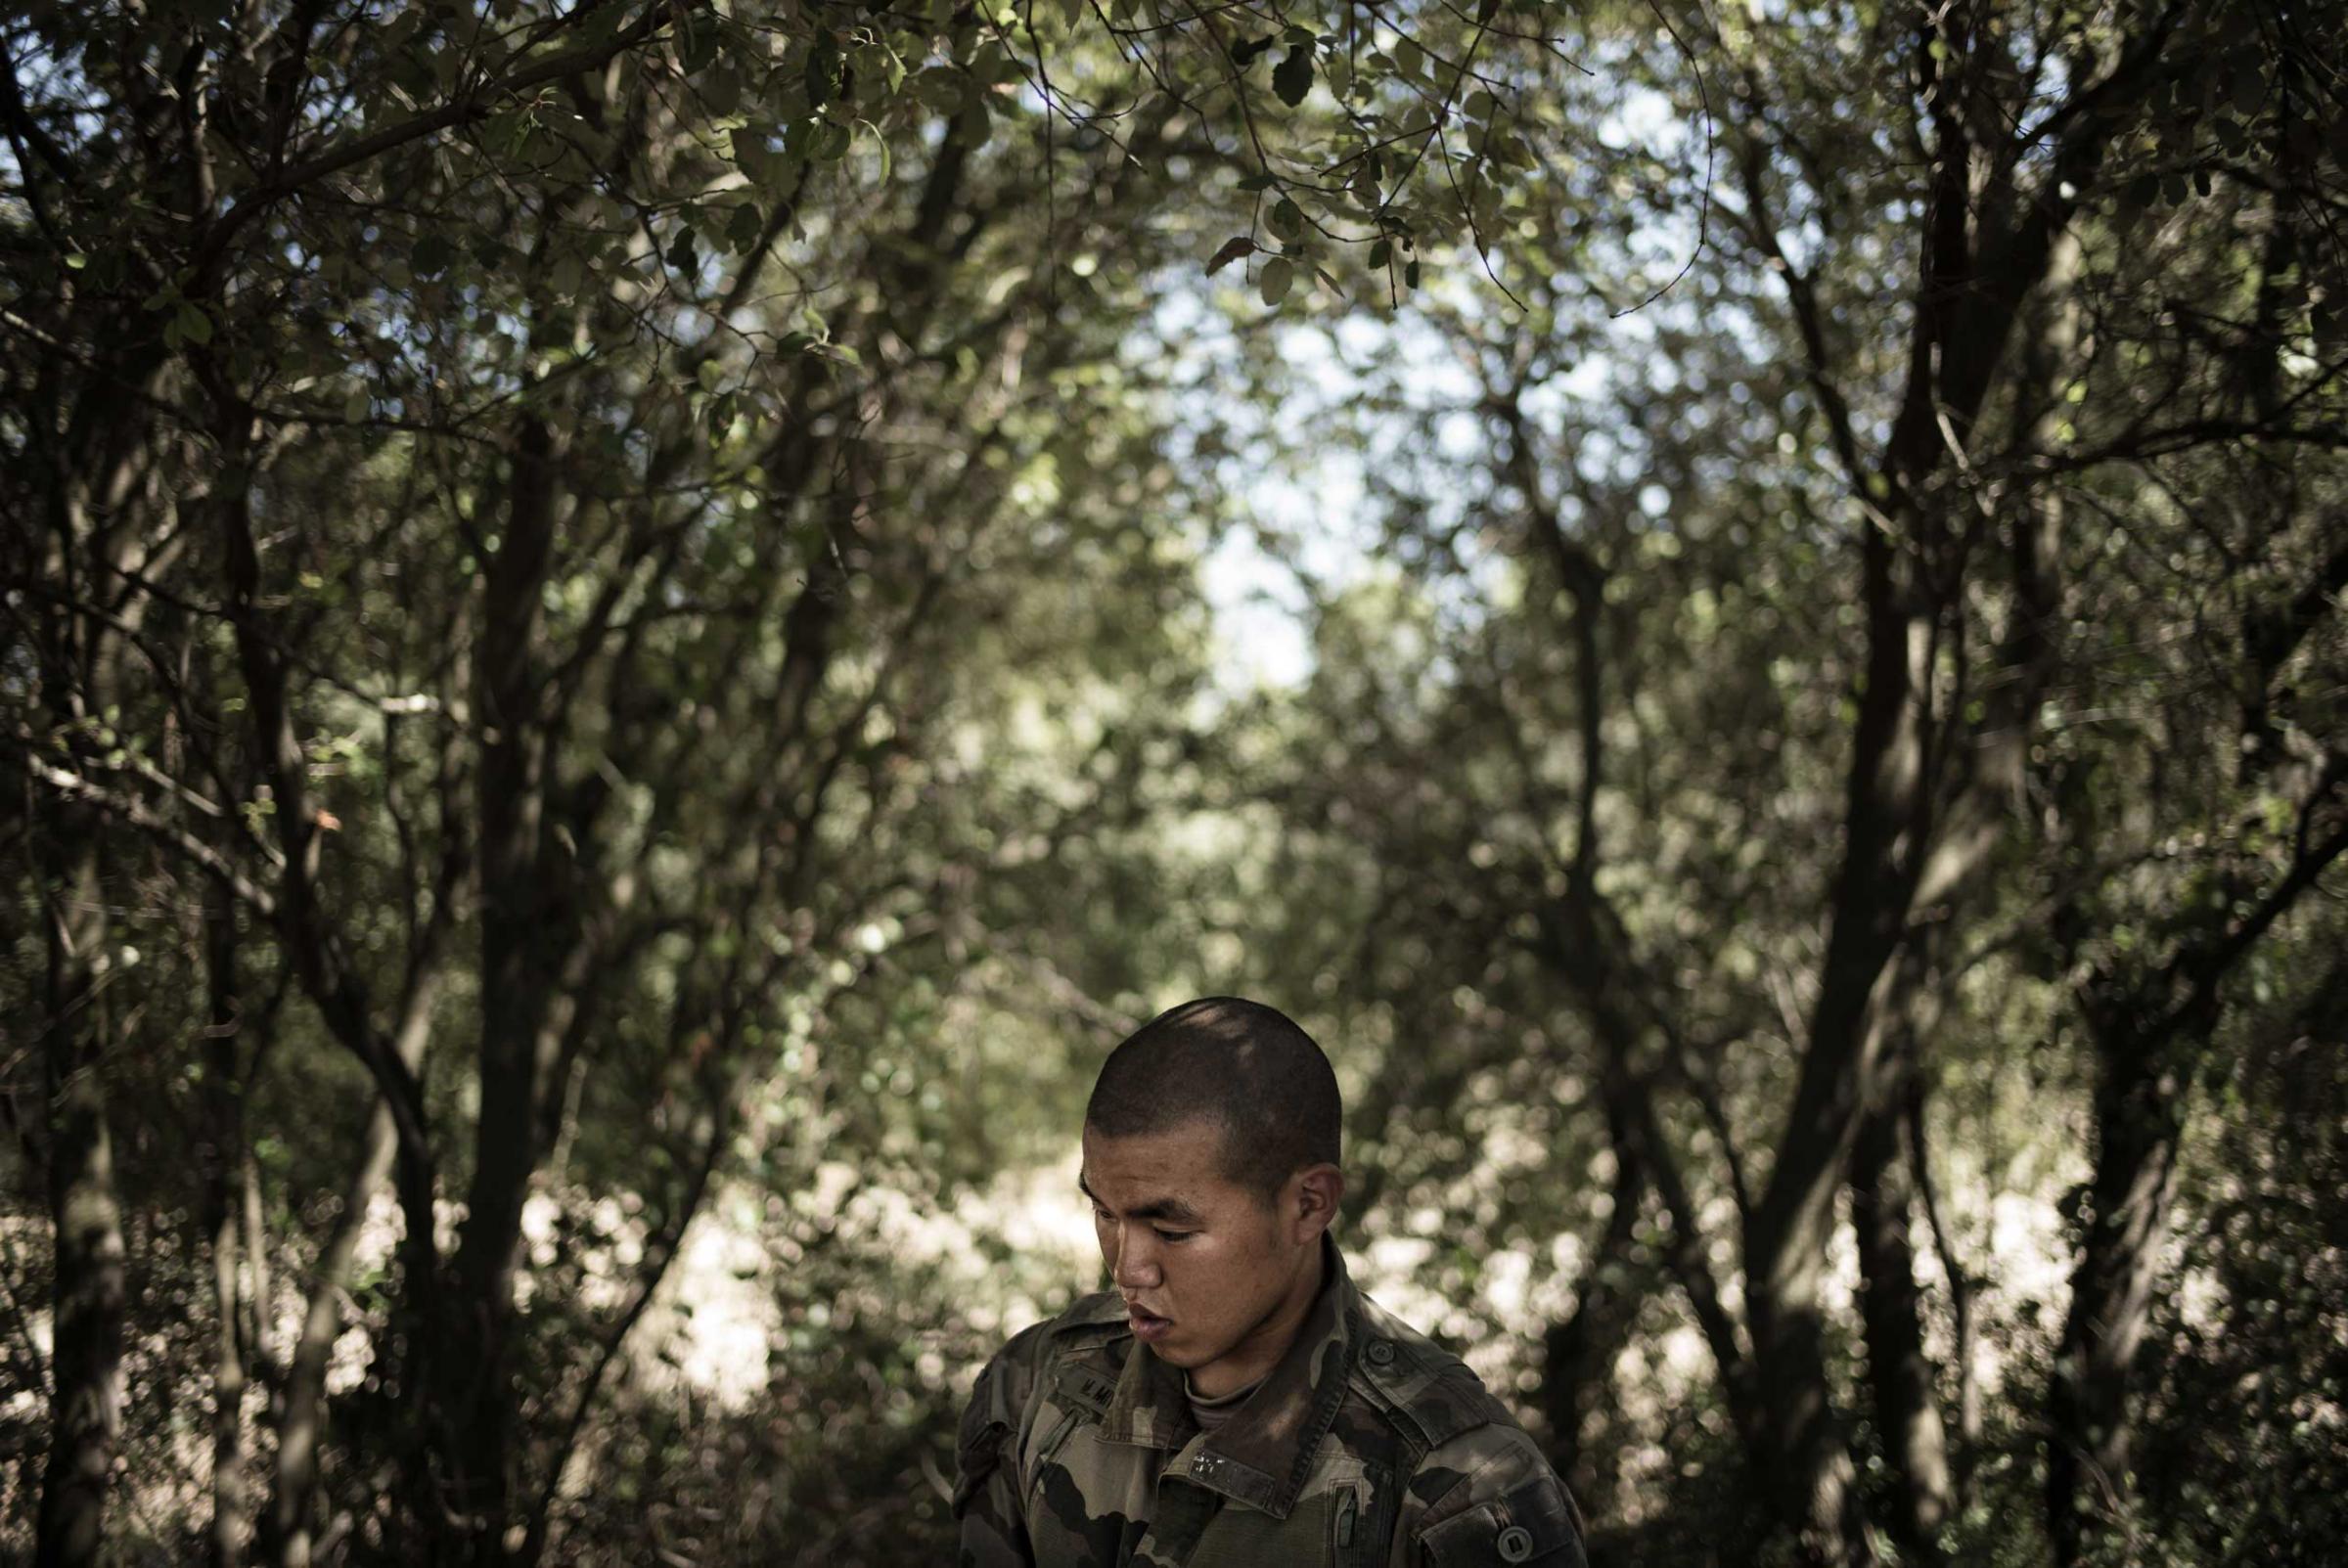 A Japanese Legionnaire is waiting for instructions during his training. Nimes, France. Aug. 11, 2015.